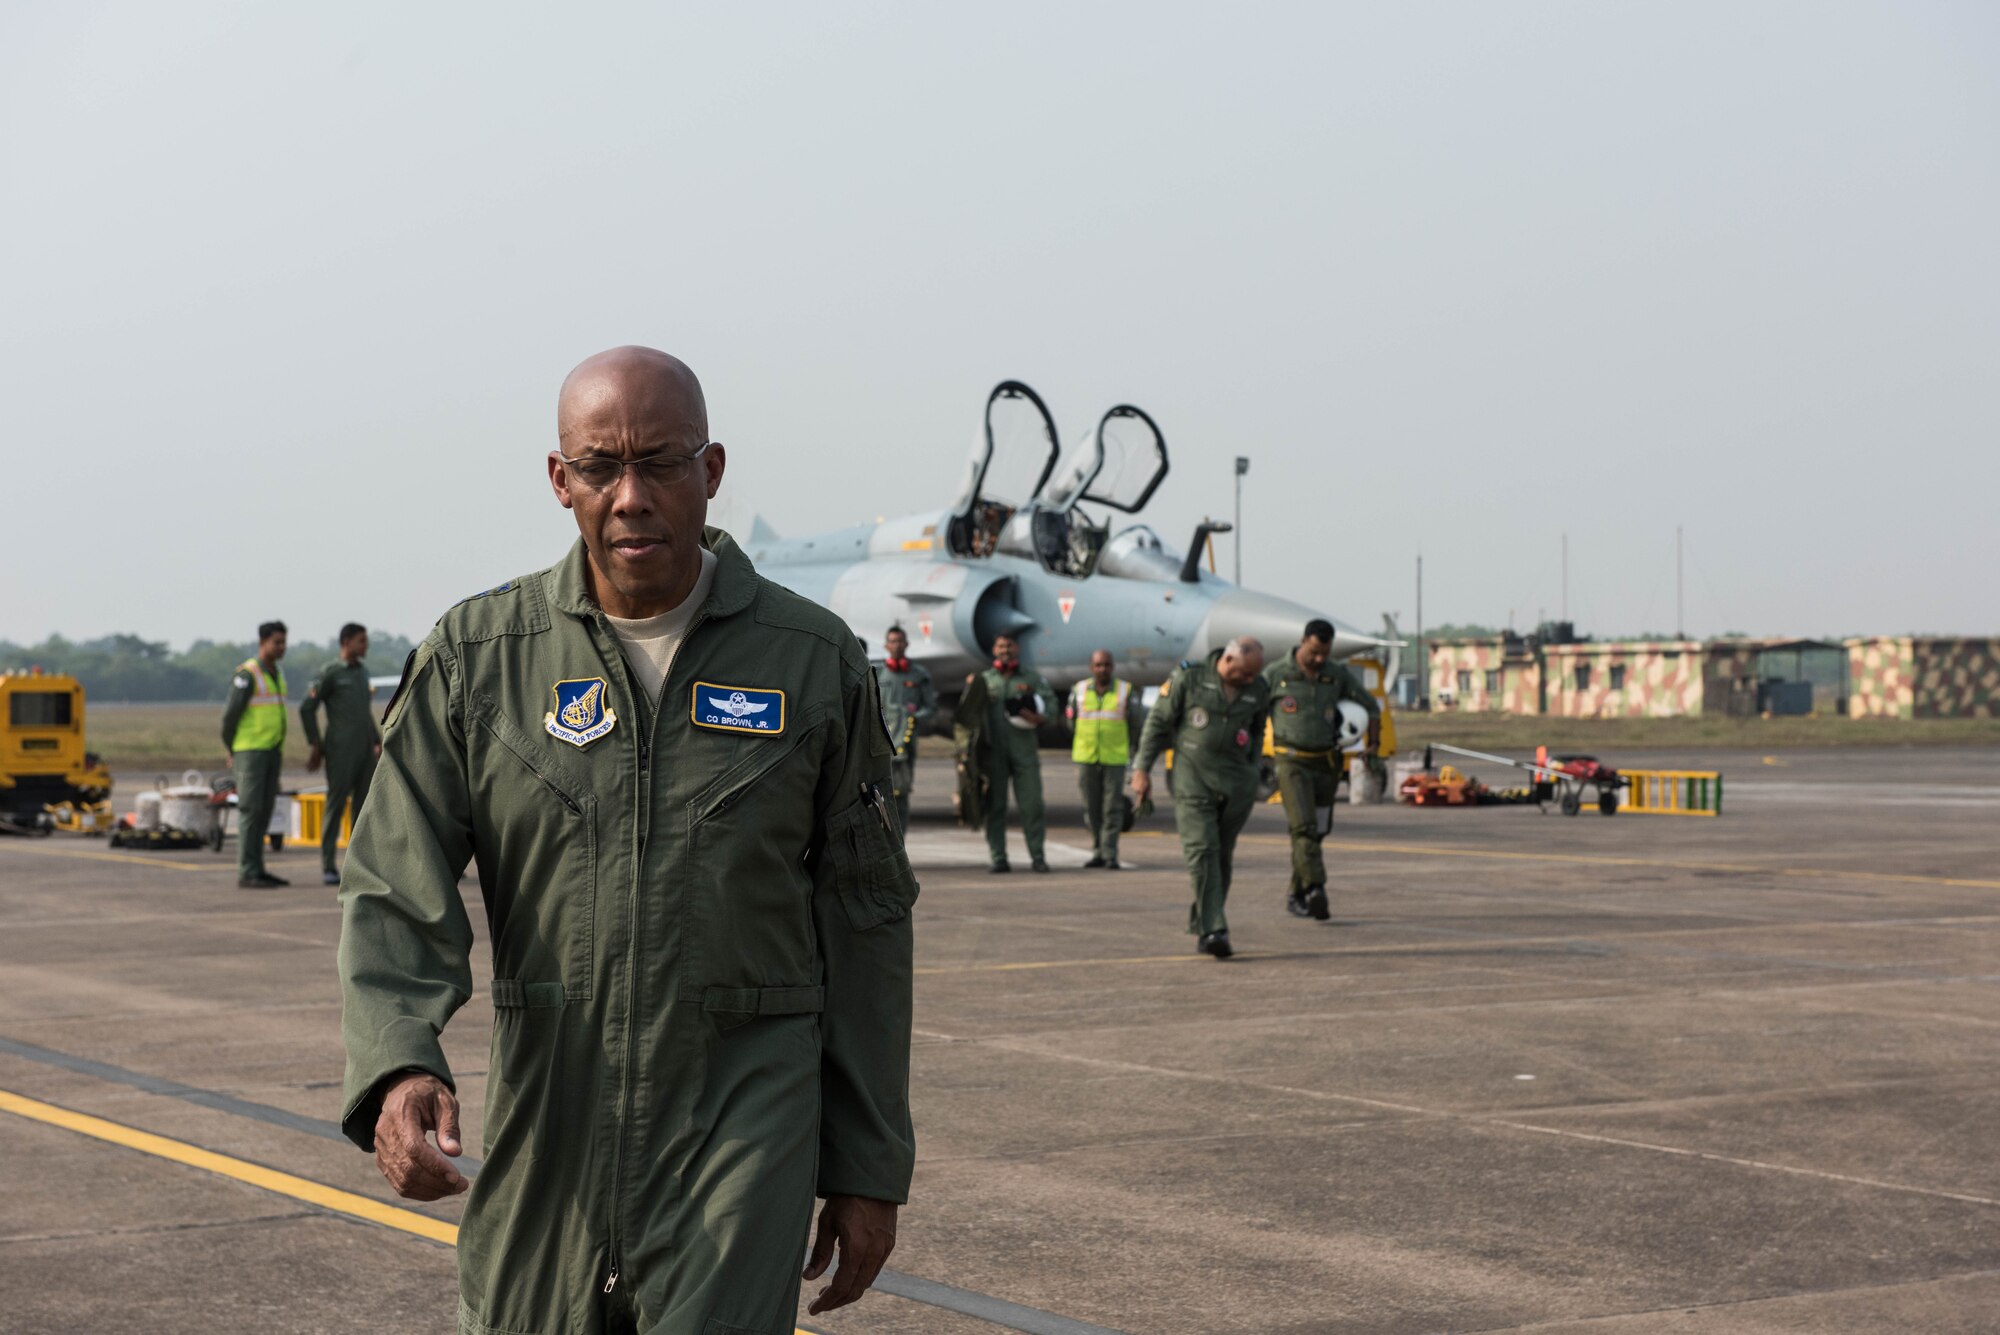 U.S. Air Force Gen. CQ Brown, Jr., Pacific Air Forces commander, walks off the flight-line after his orientation flight in an Indian Air Force Mirage 2000 at Cope India 19 at Kalaikunda Air Force Station, India, Dec. 14, 2018.